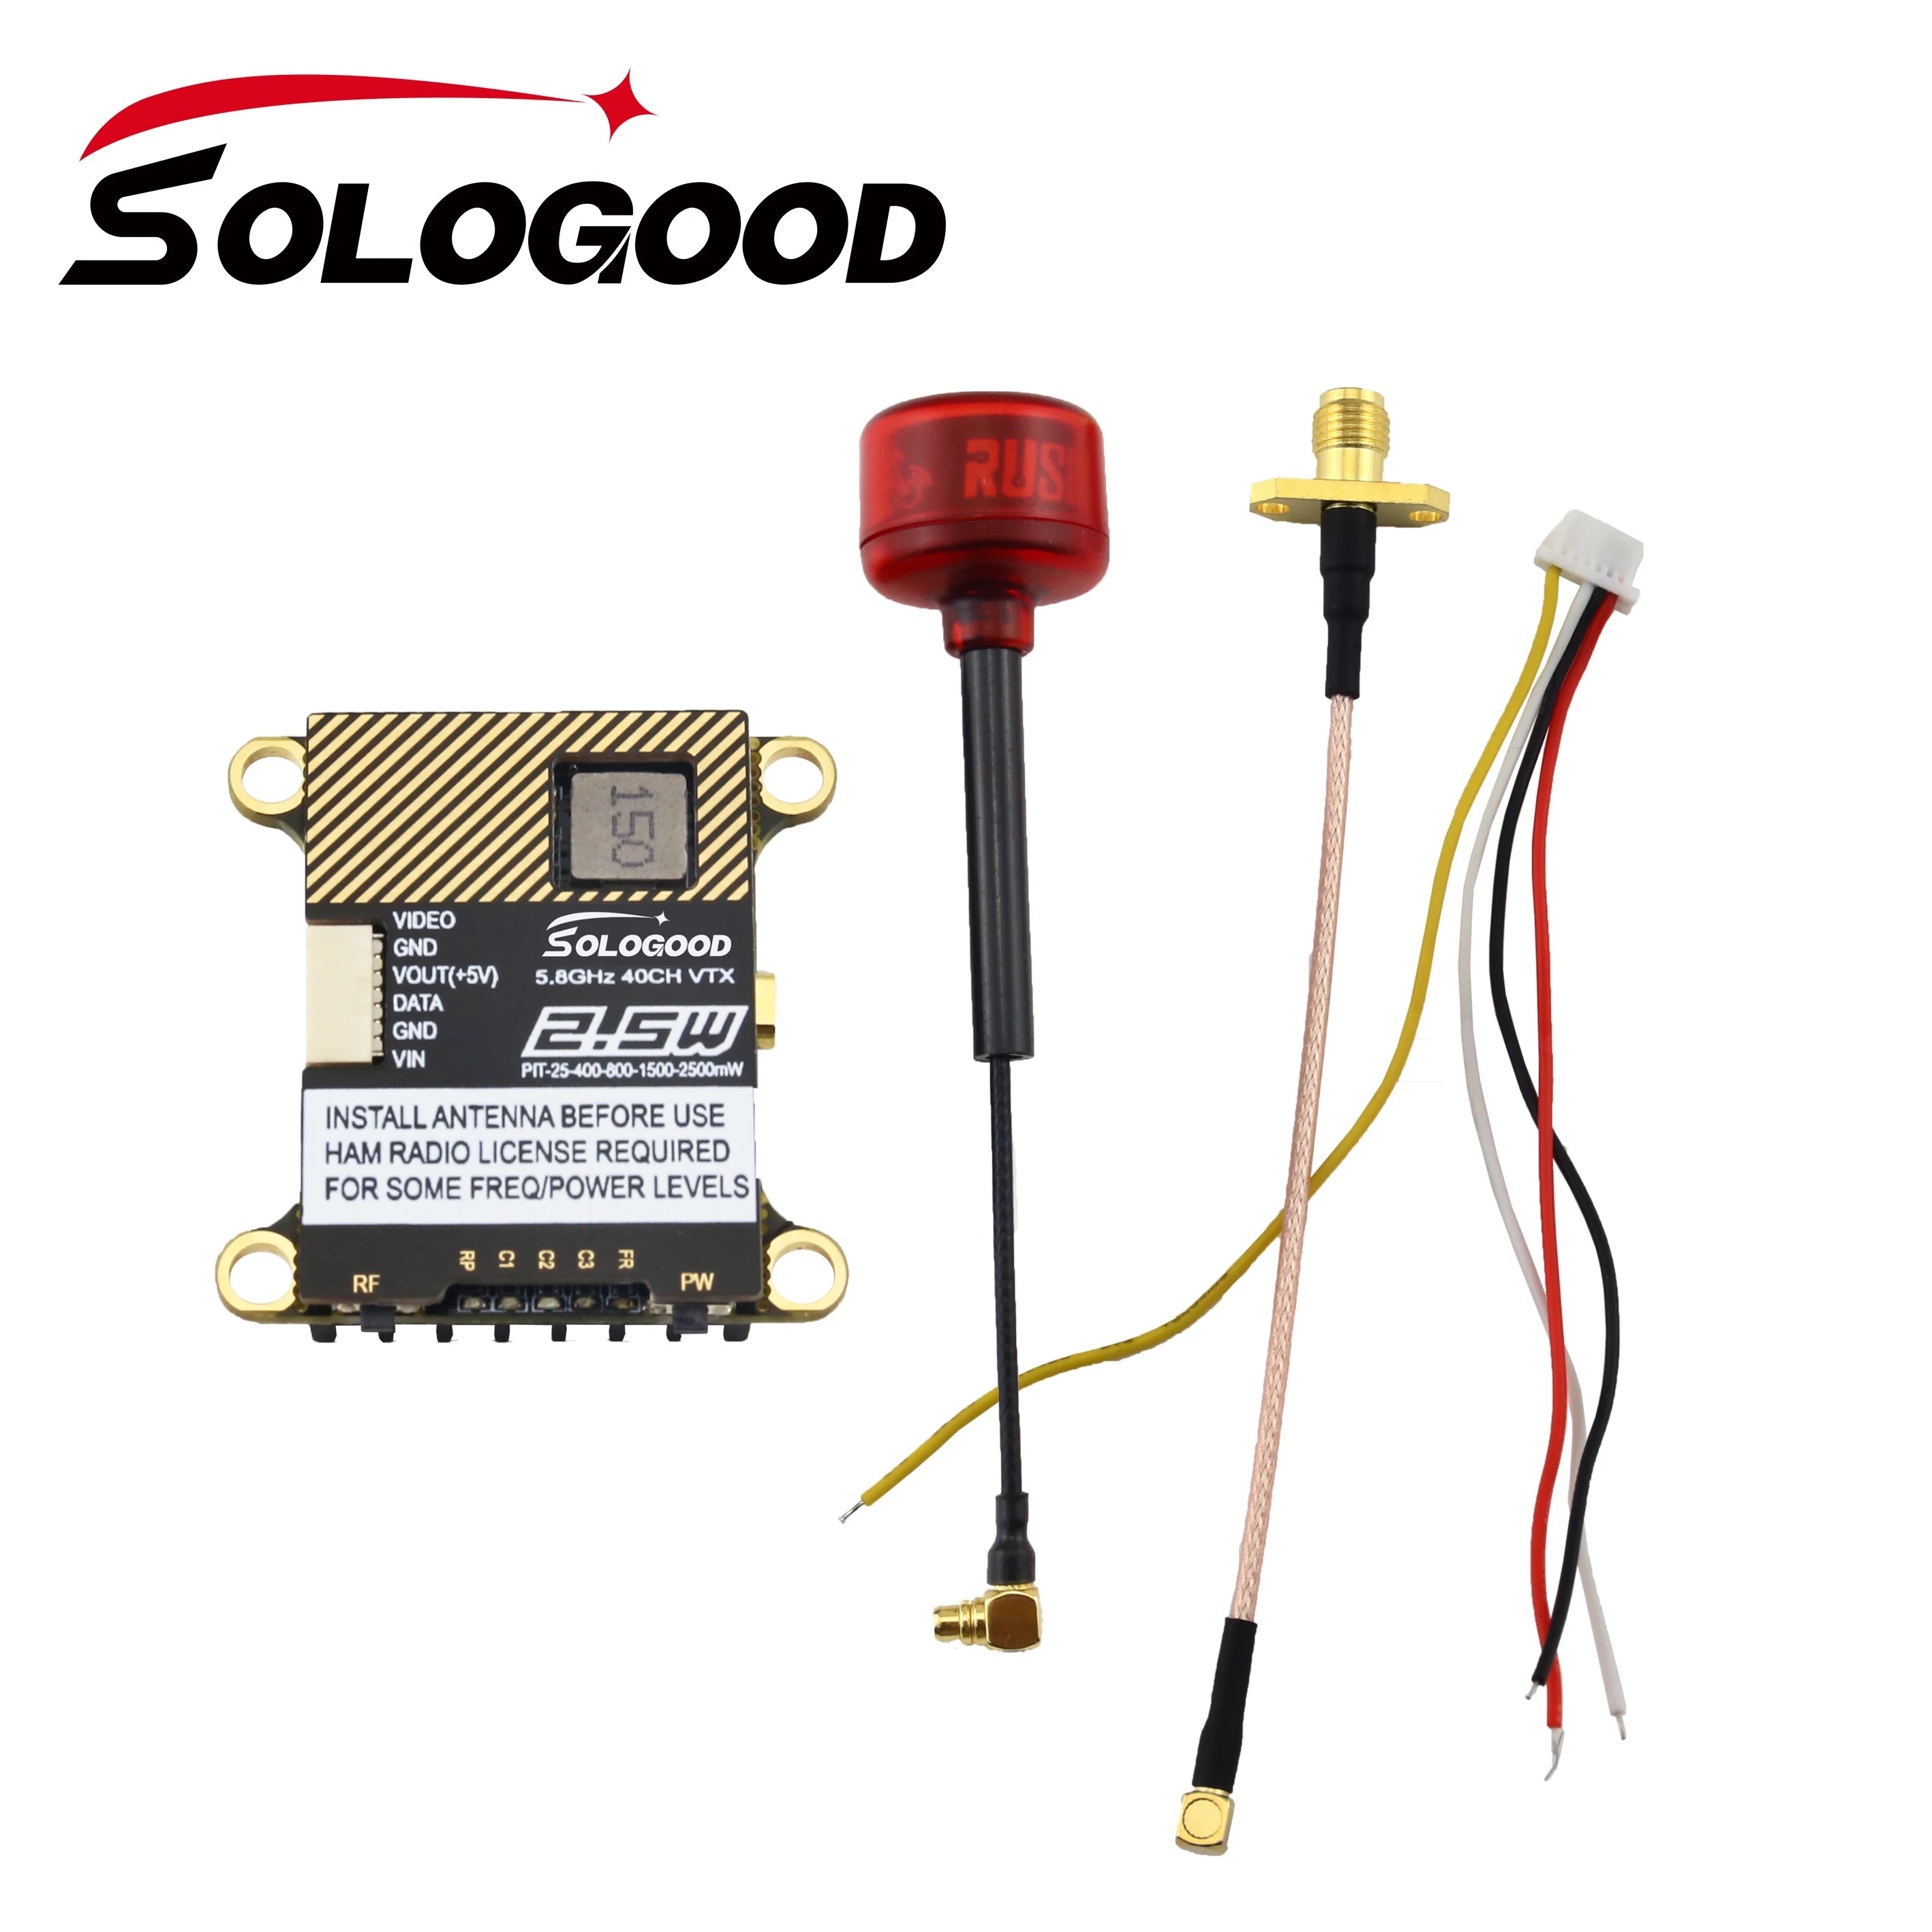 SoloGood 5.8G 2.5W 40CH VTX, SOLOGOOD ruo VIDEO GND SoLogood VOUT